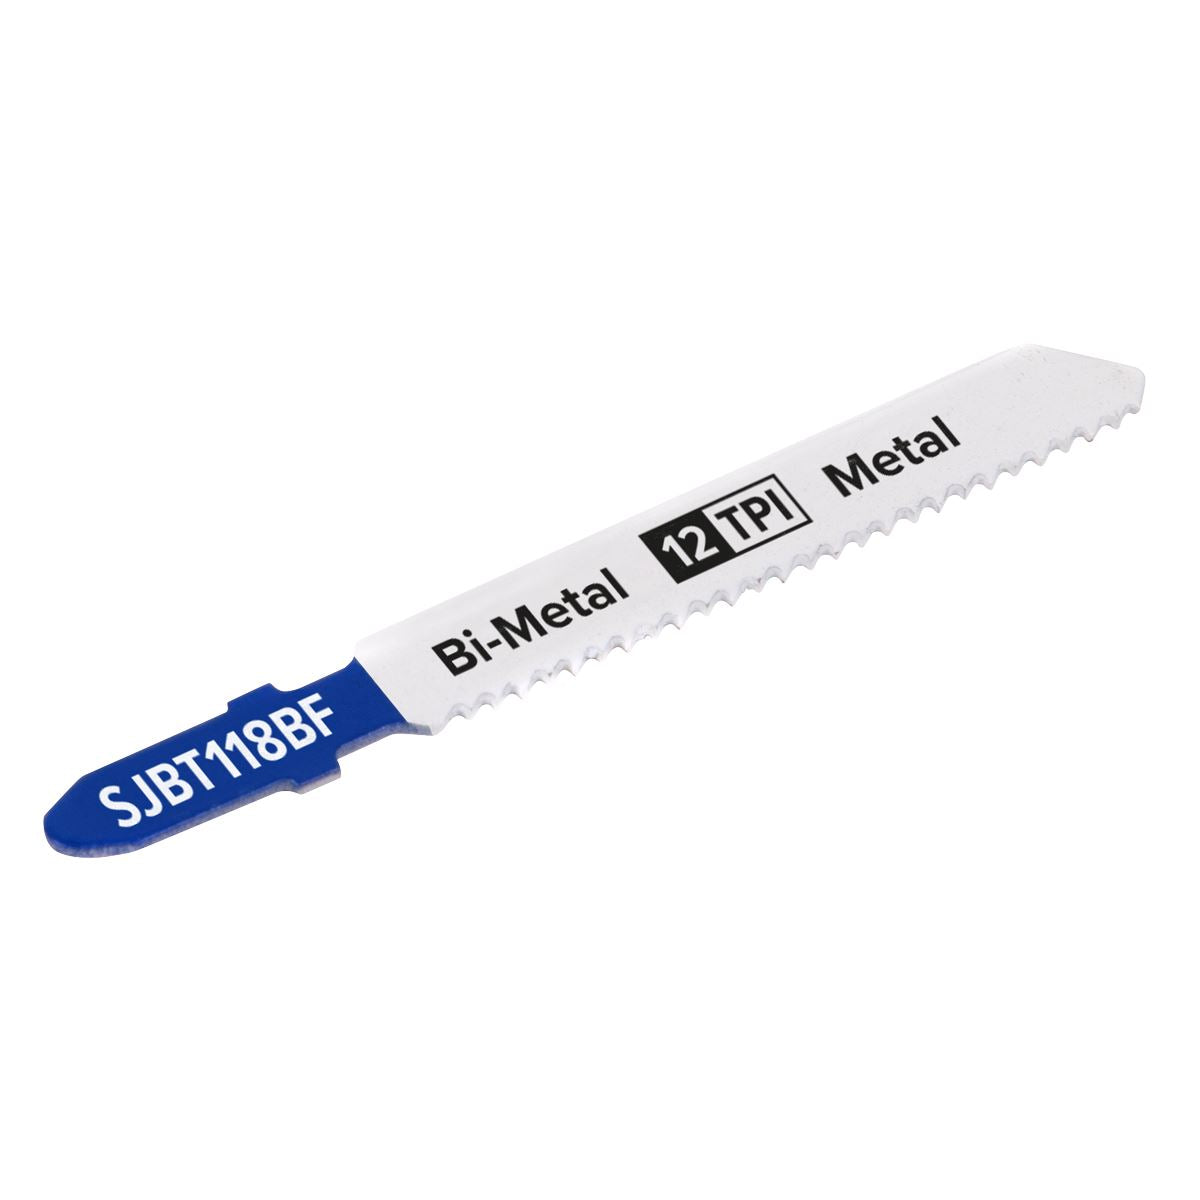 Sealey Jigsaw Blade Metal 75mm 12tpi - Pack of 5